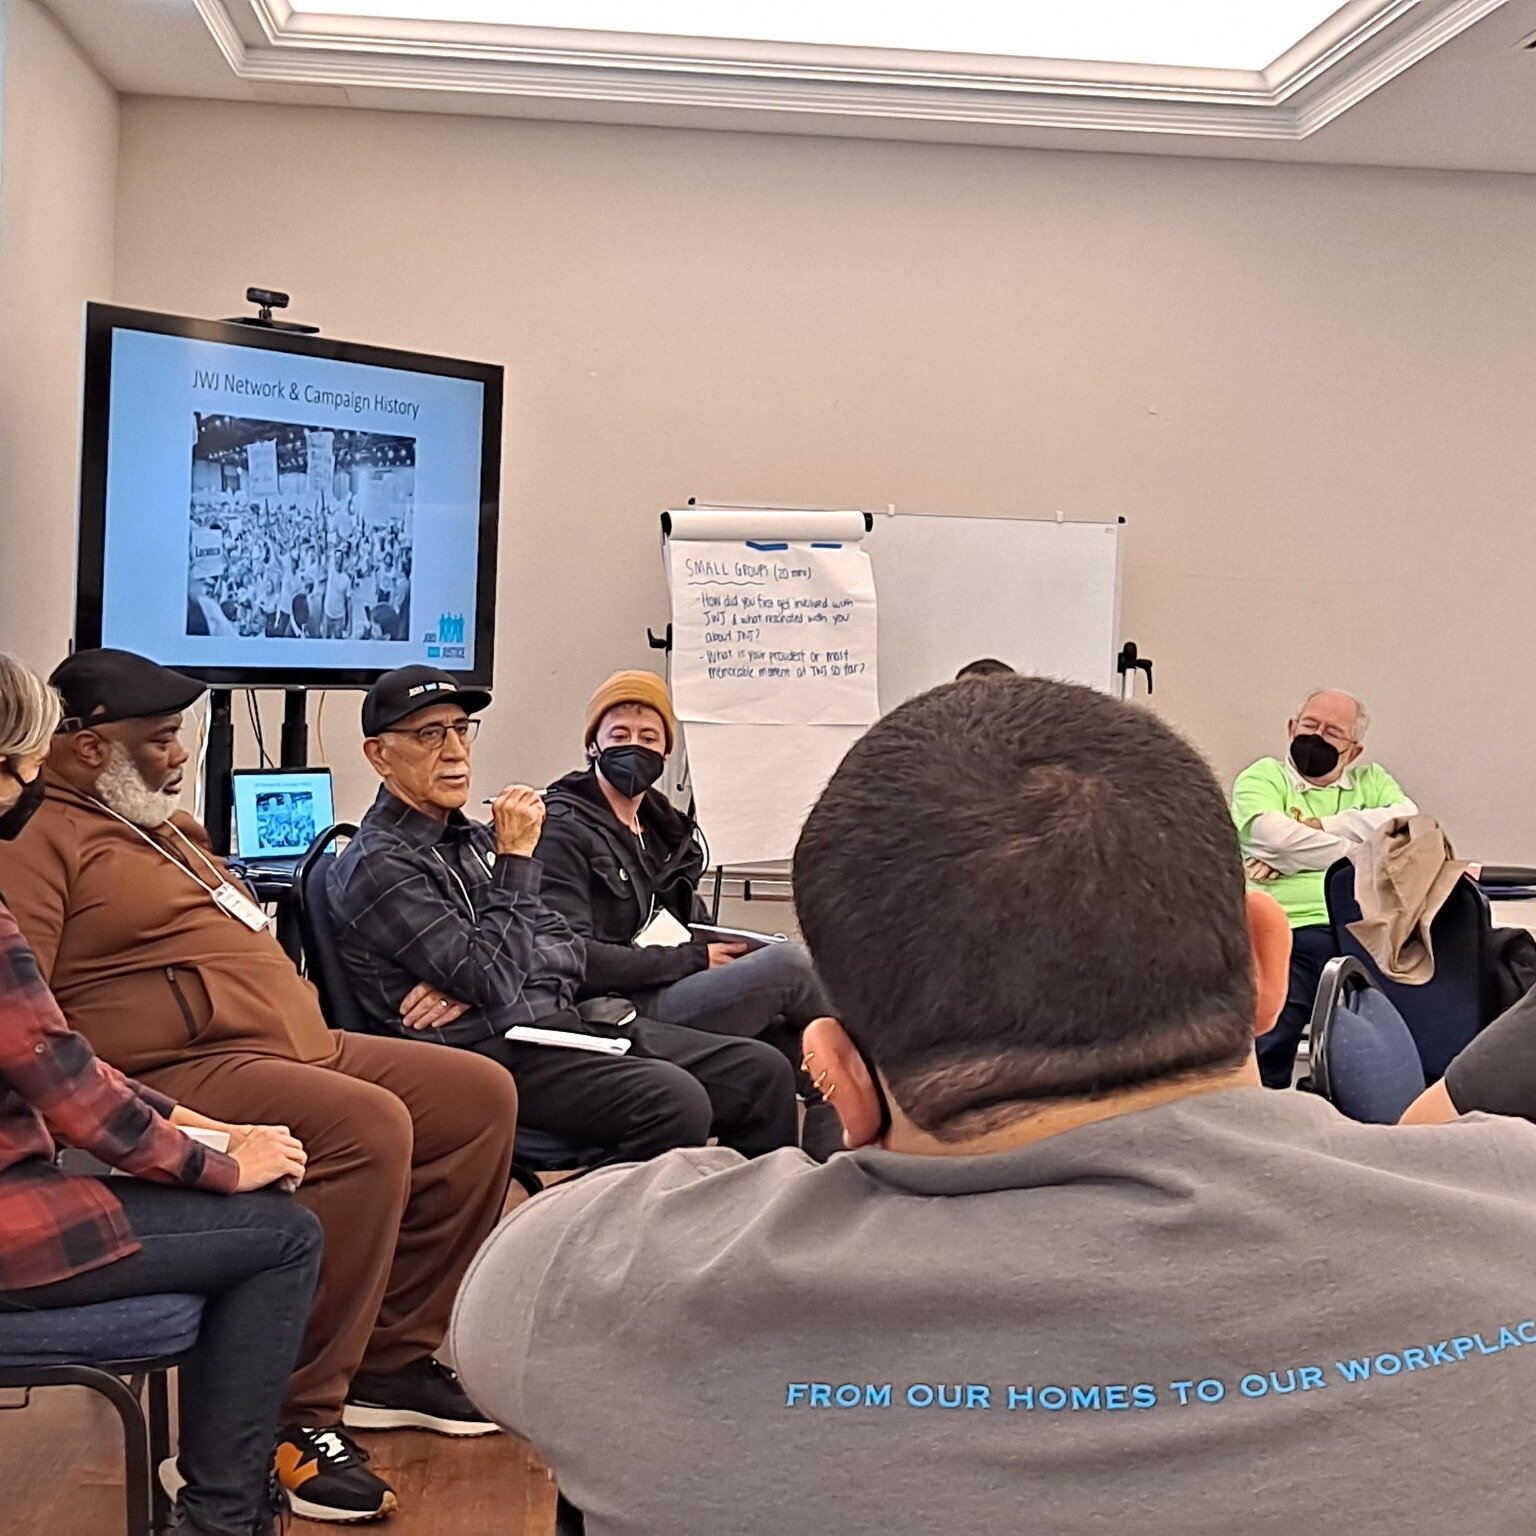 Last month, @jwjnational invited affiliate organizations to send representatives to a National Gathering in D.C. for a weekend of connection, strategizing, and a shared vision of worker power through collective bargaining. Not only did we learn about